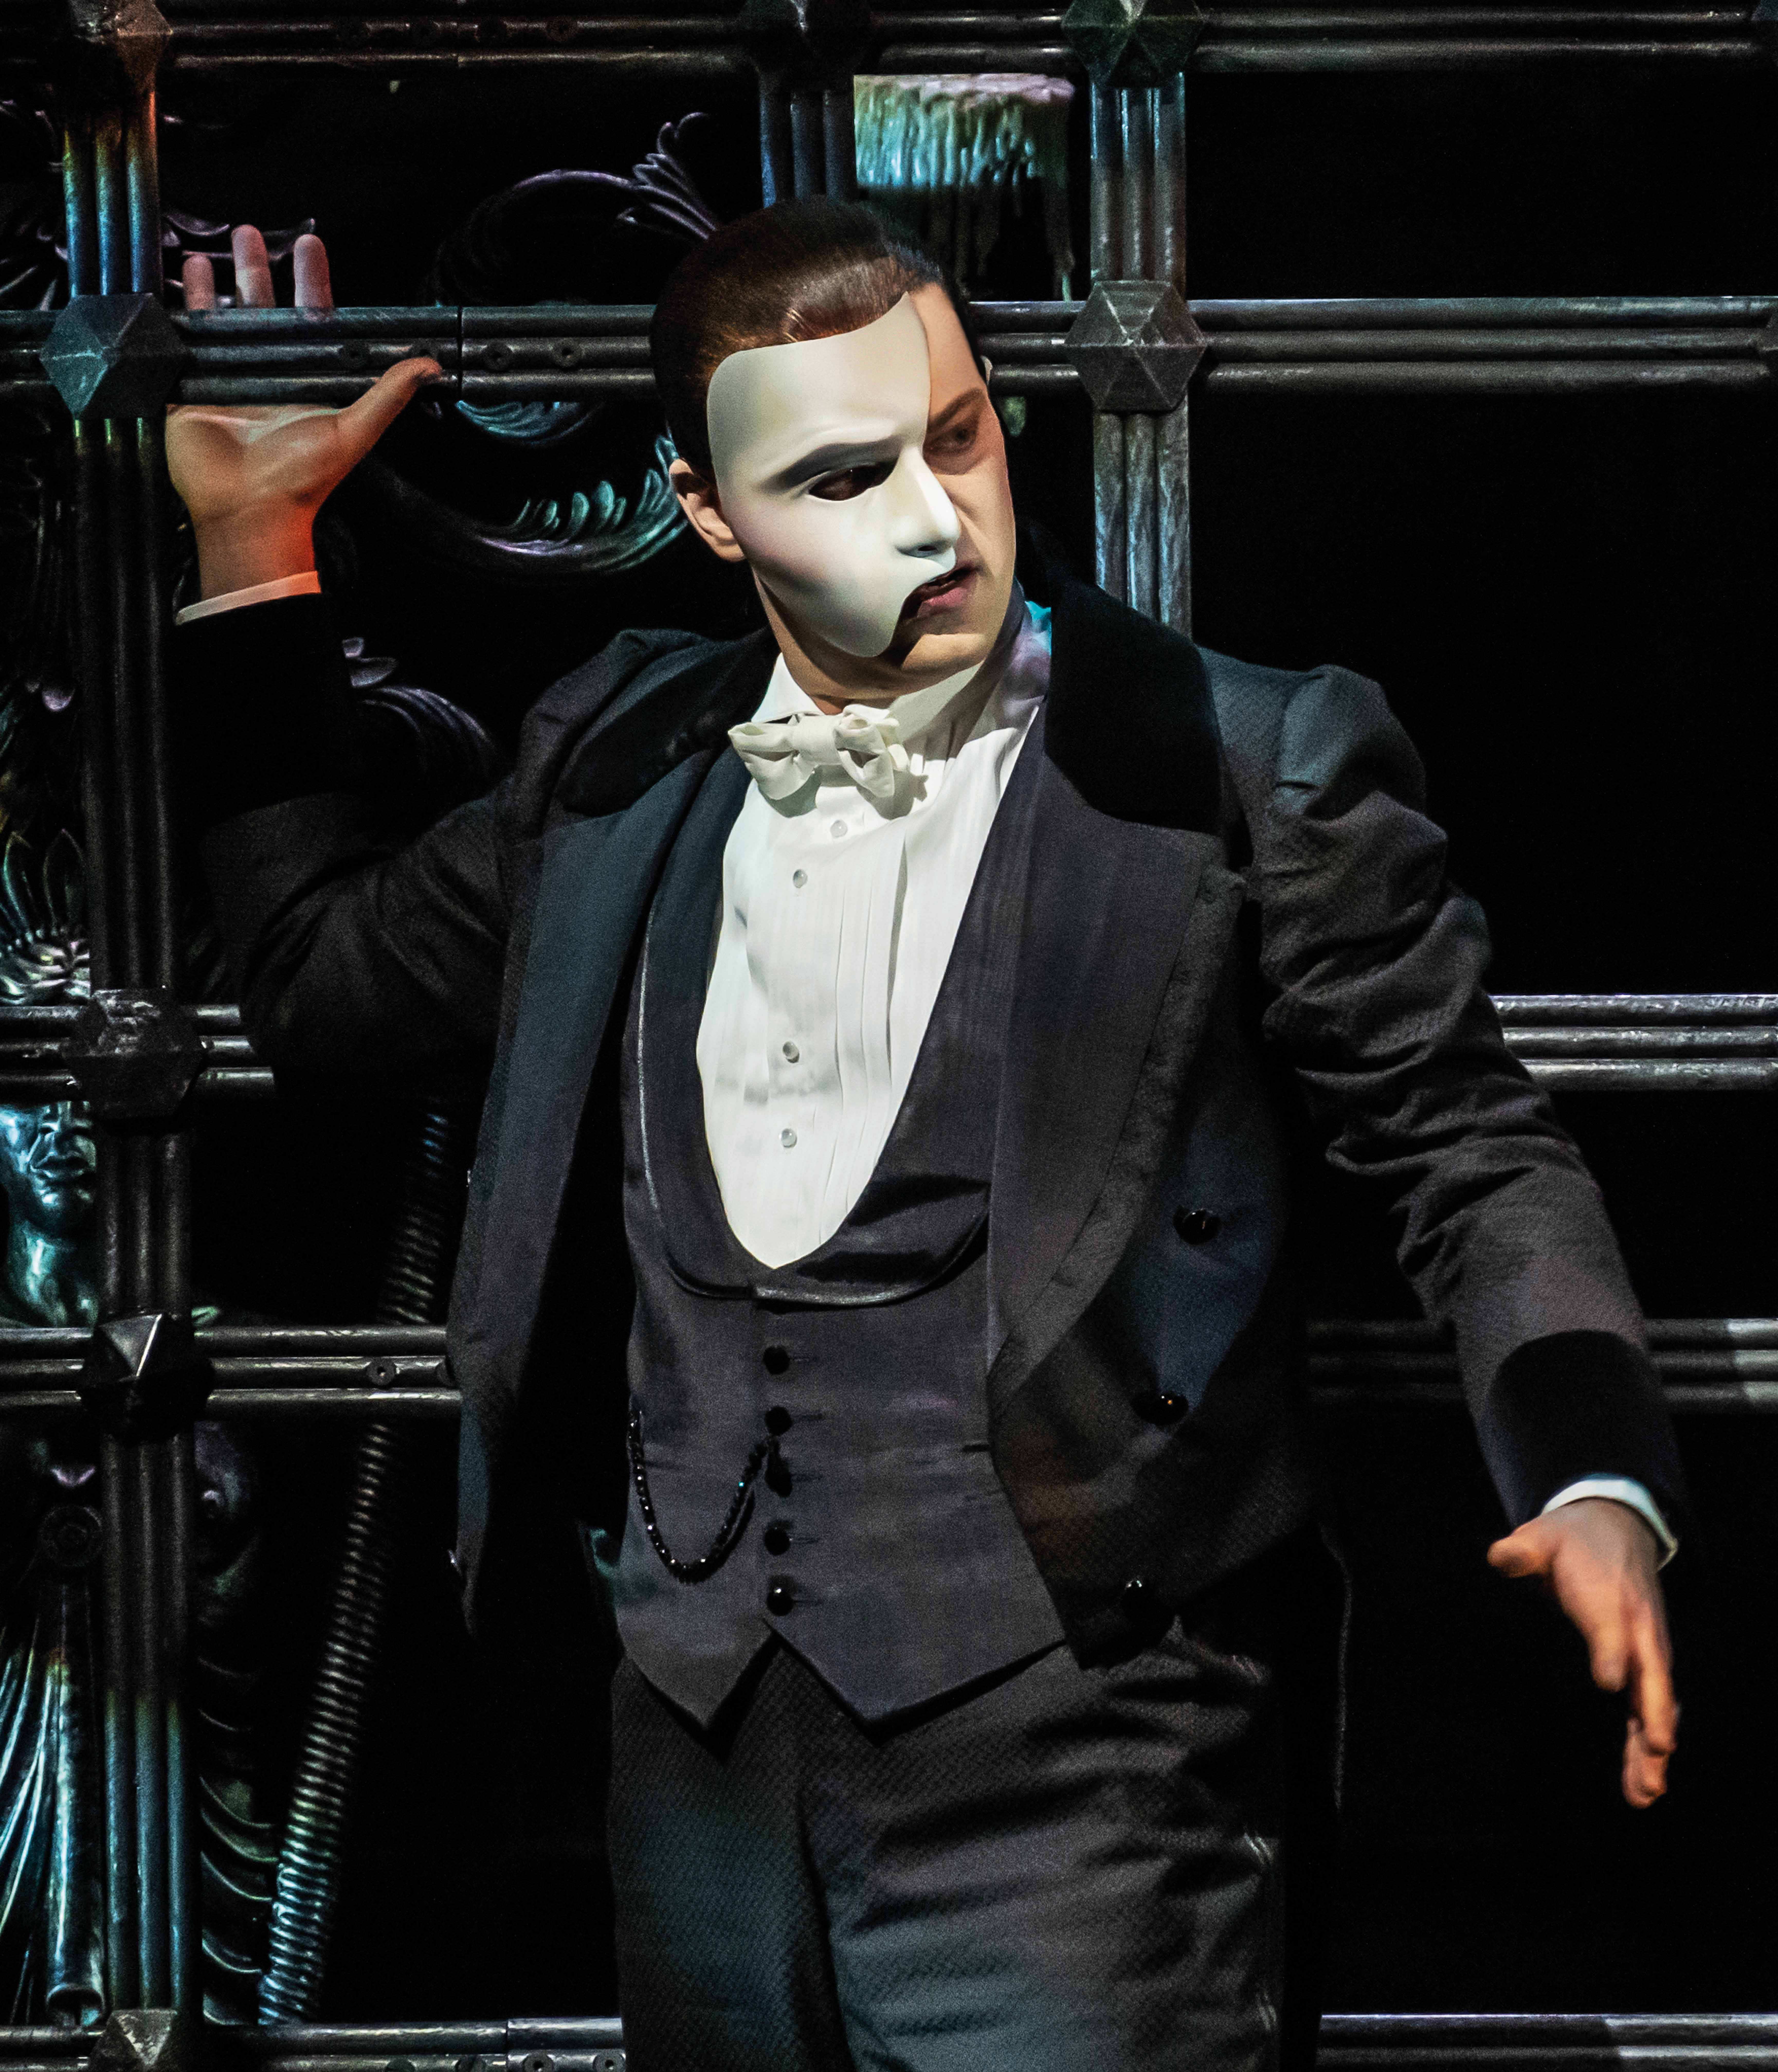 The Phantom of the Opera photo from the show